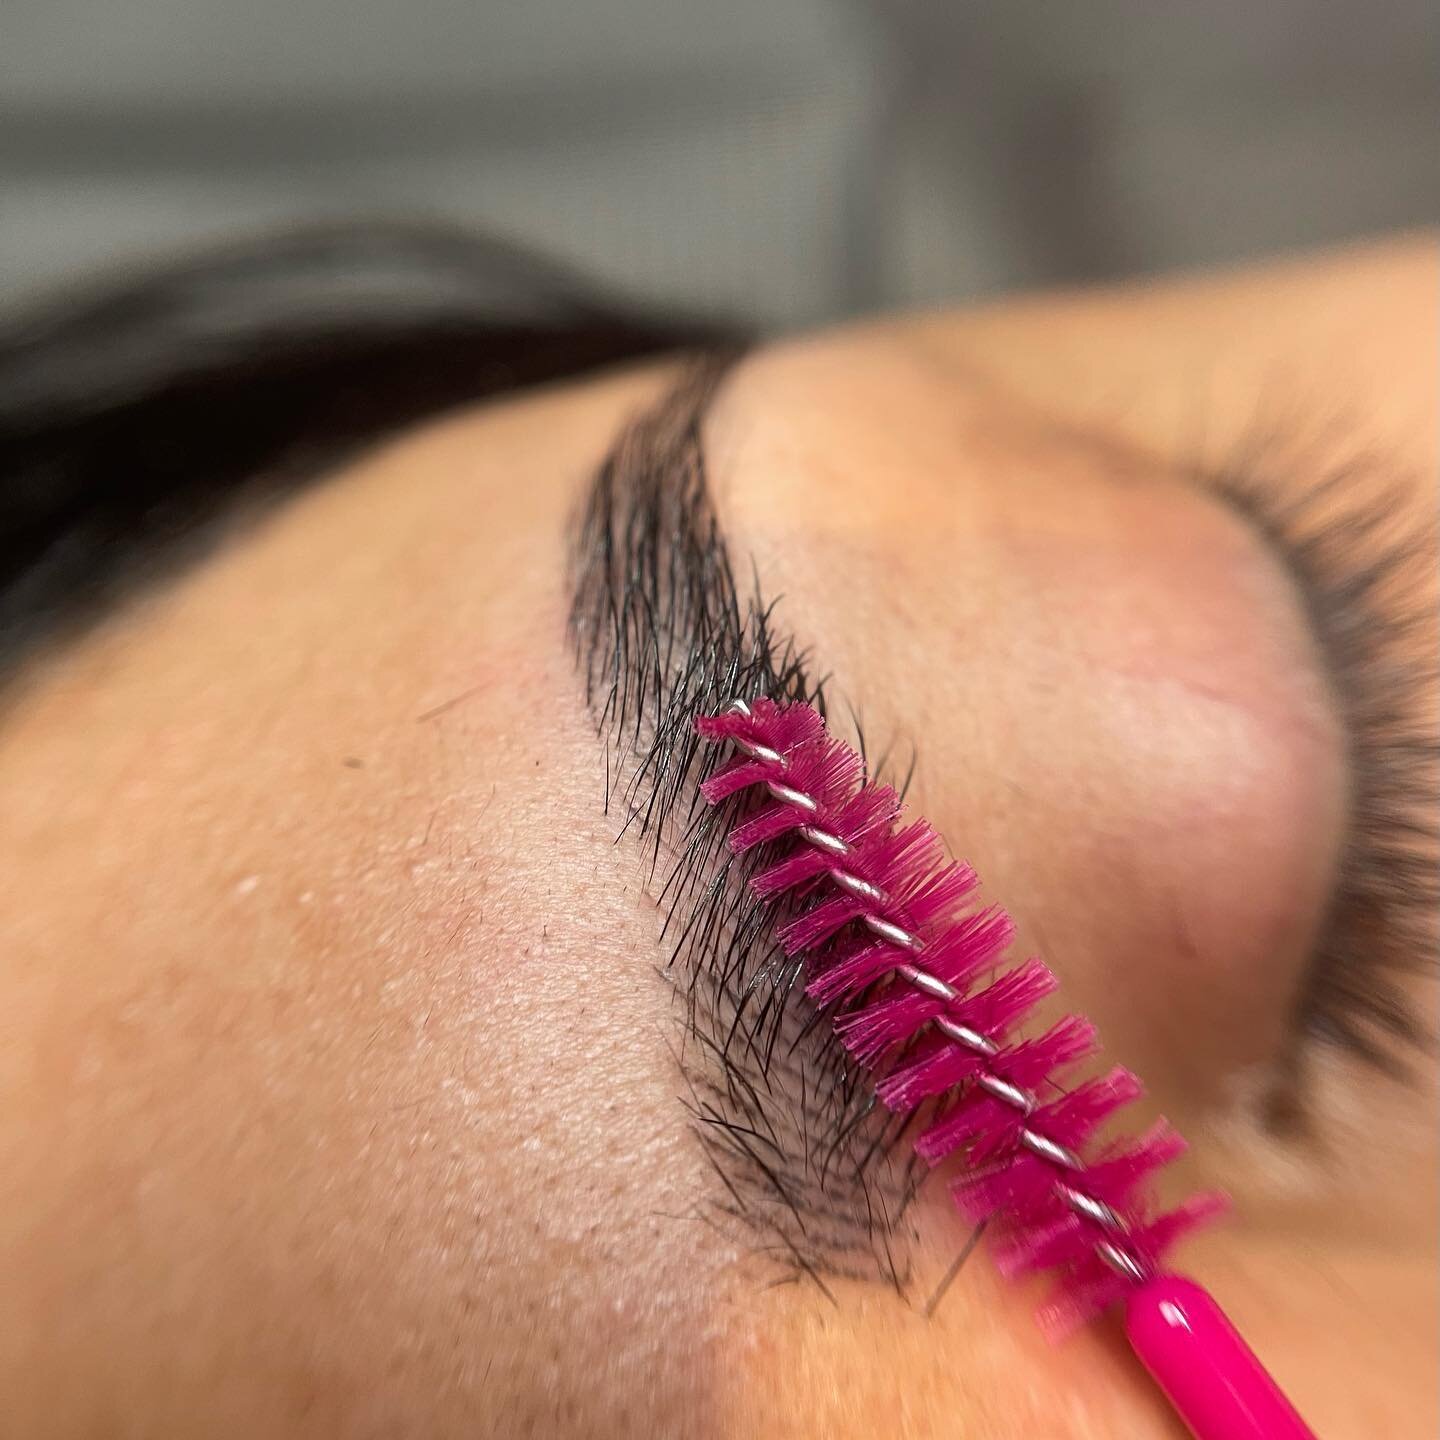 Healed microblading after only 1 session 😍 No edits just my work! 

Permanent makeup procedures are almost always a 2 session process. The initial appointment is where we create a shape that suits your facial features and lay a base for the strokes.